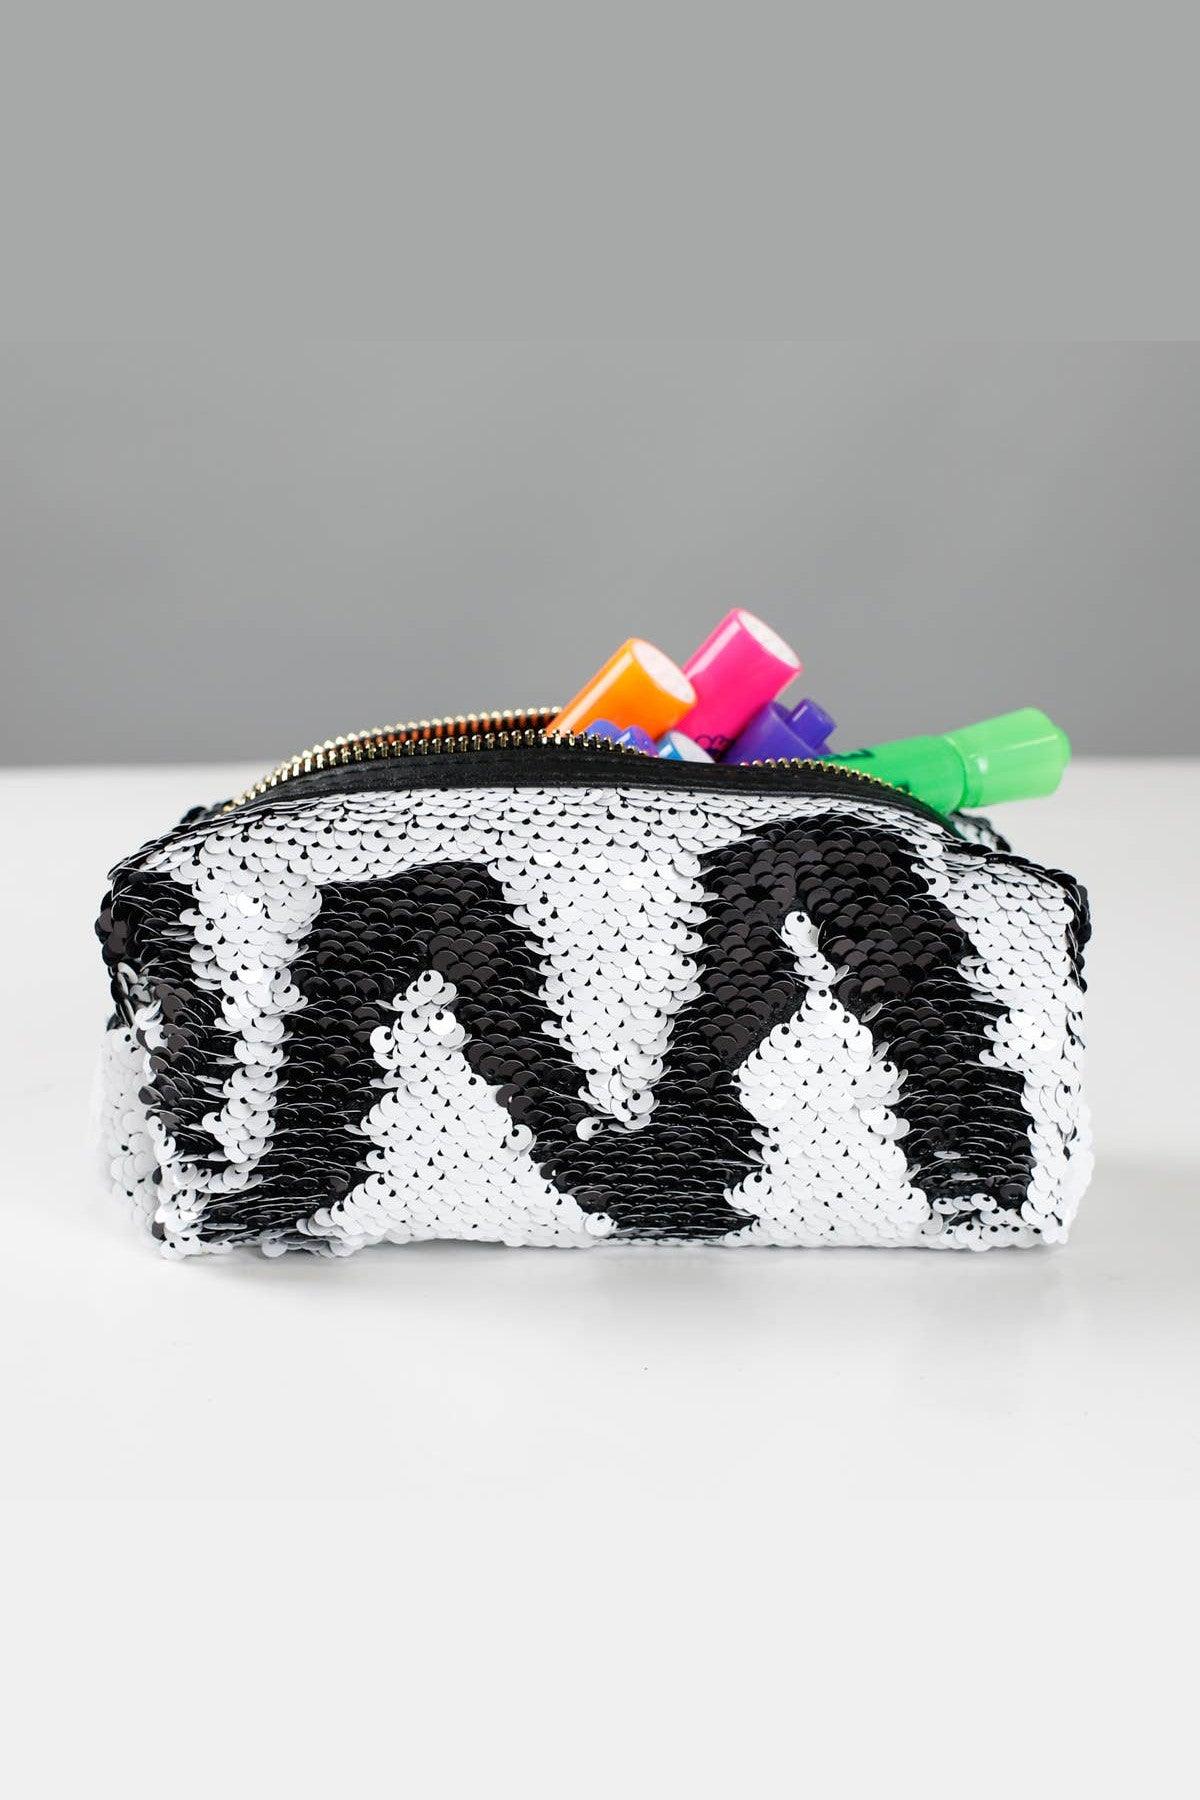 Black & White Mermaid Sequin Pouch - Strawberry Moon Boutique